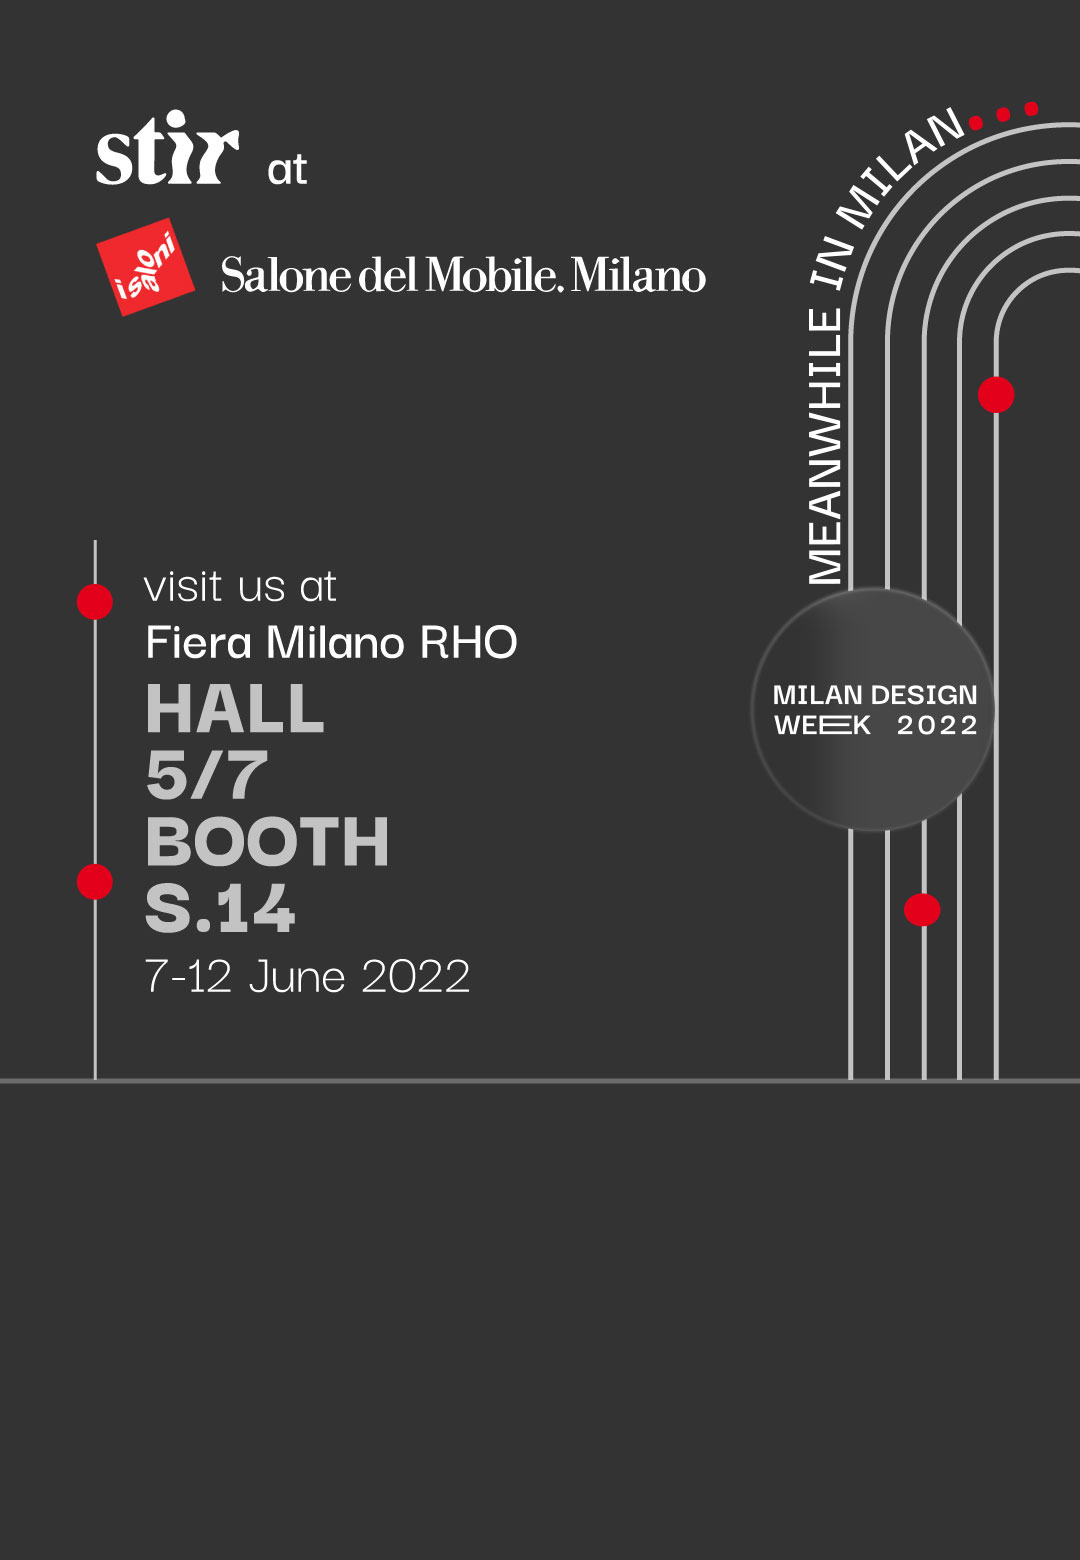 Visit the STIR booth at Salone del Mobile.Milano 2022